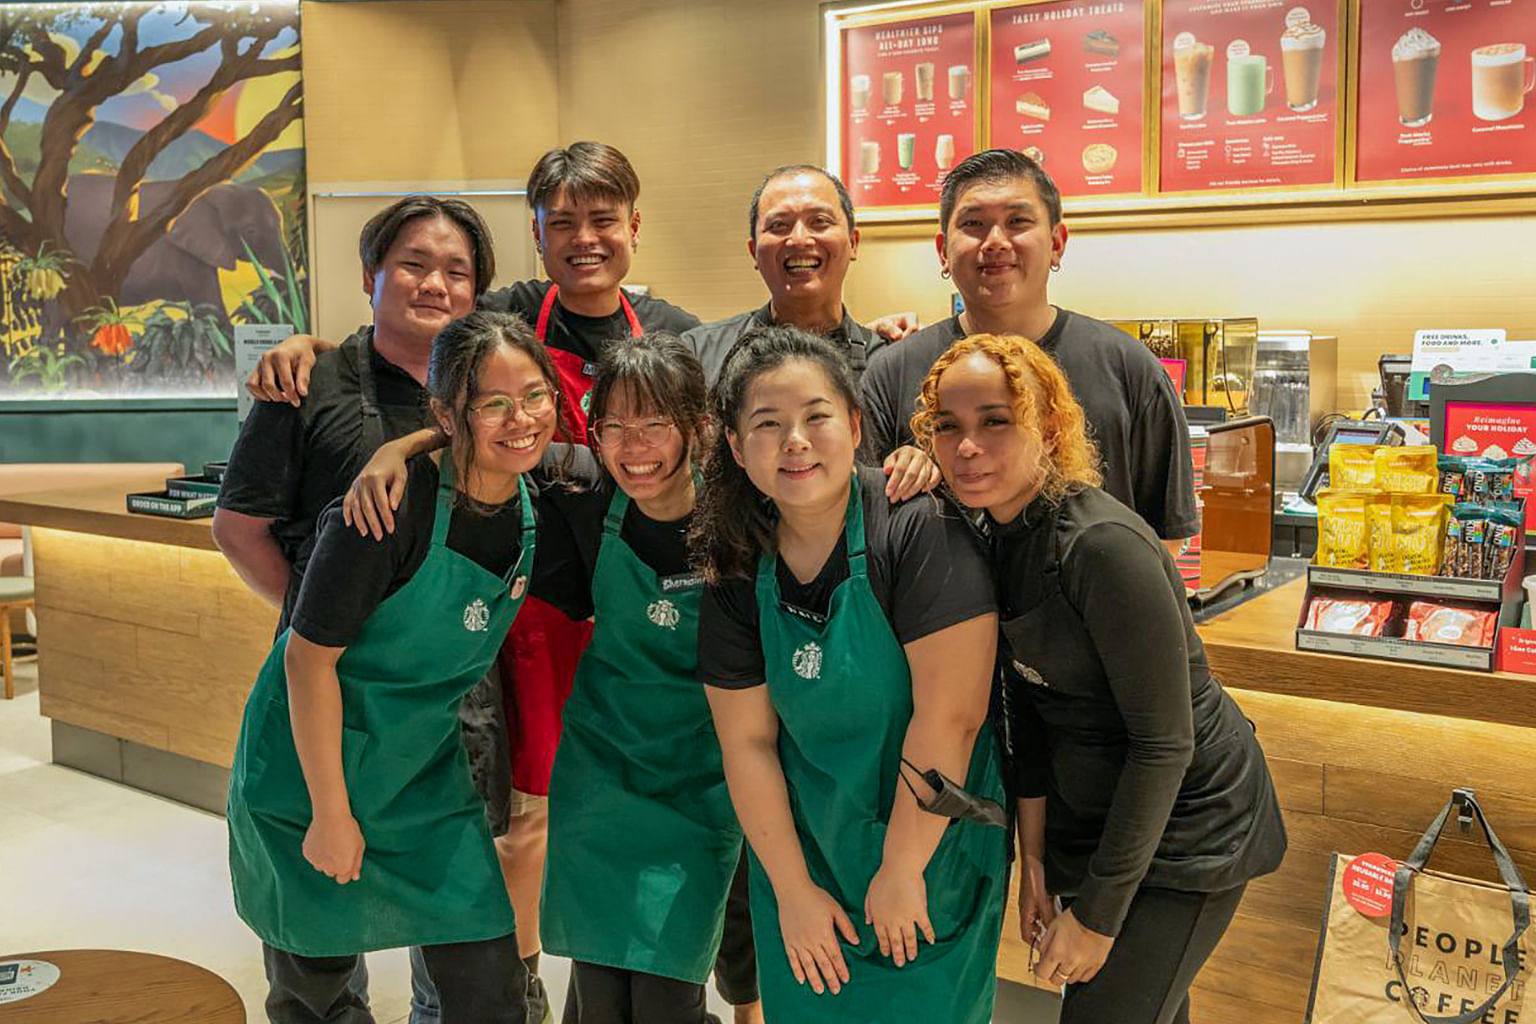 Ronnie Wong staff at Starbucks with his team